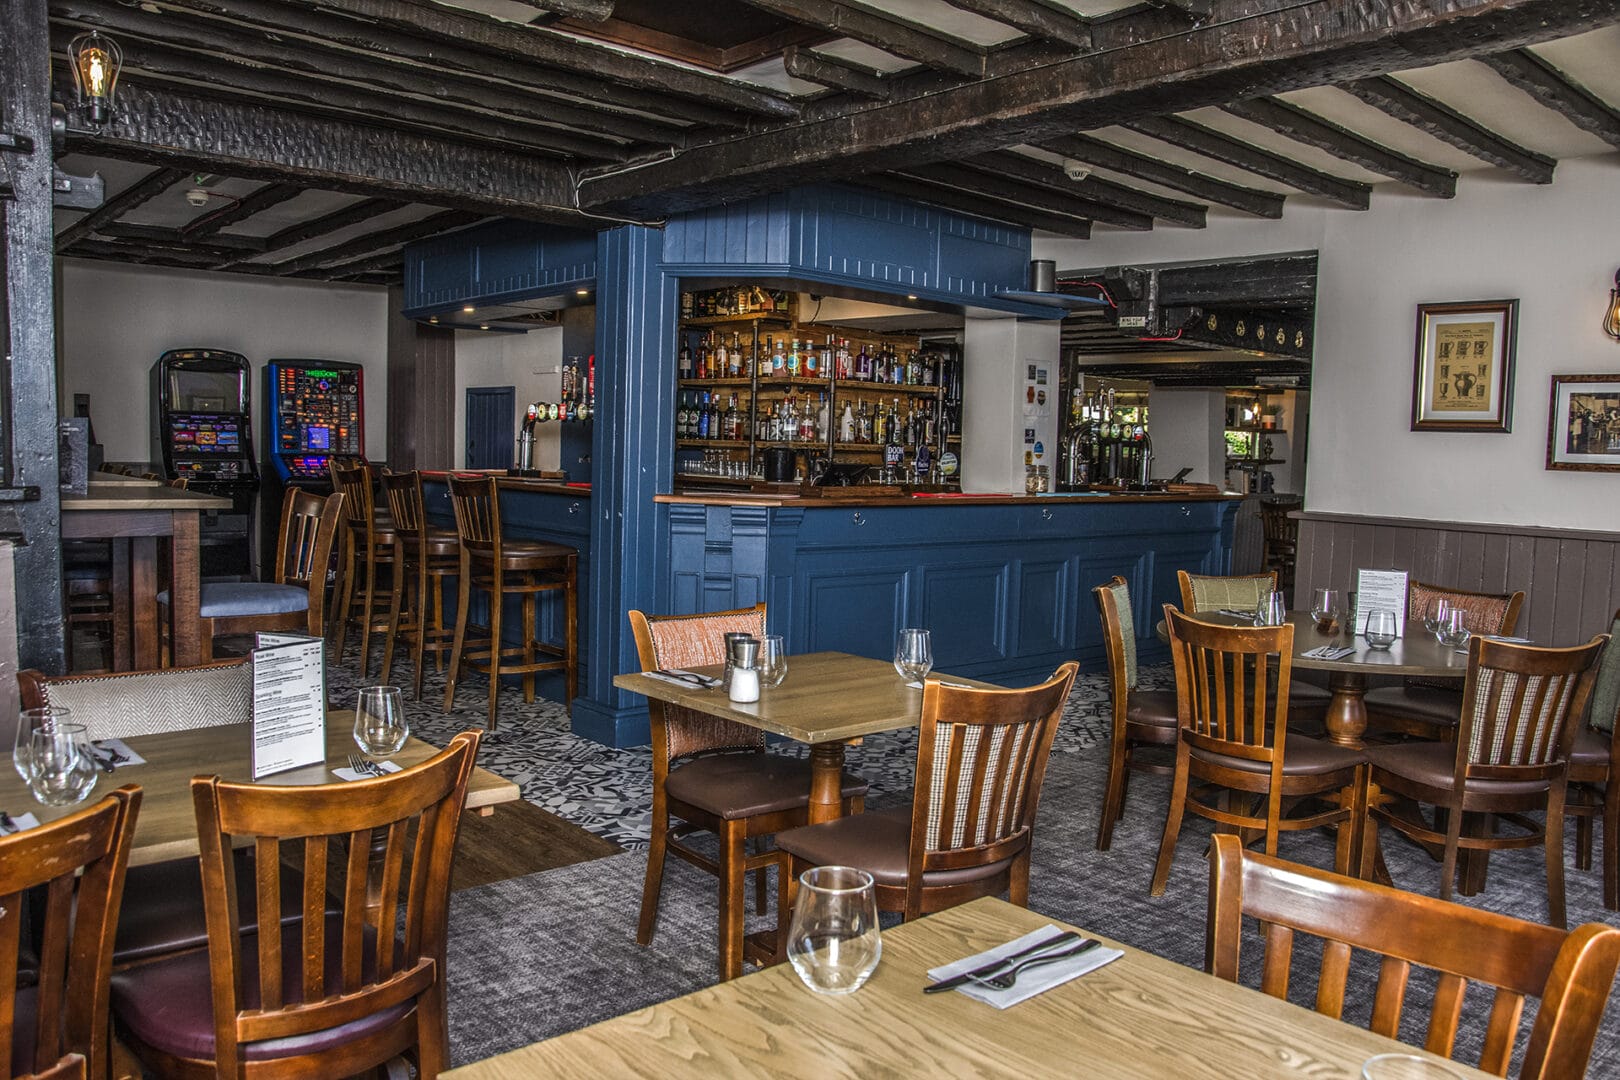 Pubs In Romsey With Quiz Nights - Visit The Hunters Inn !